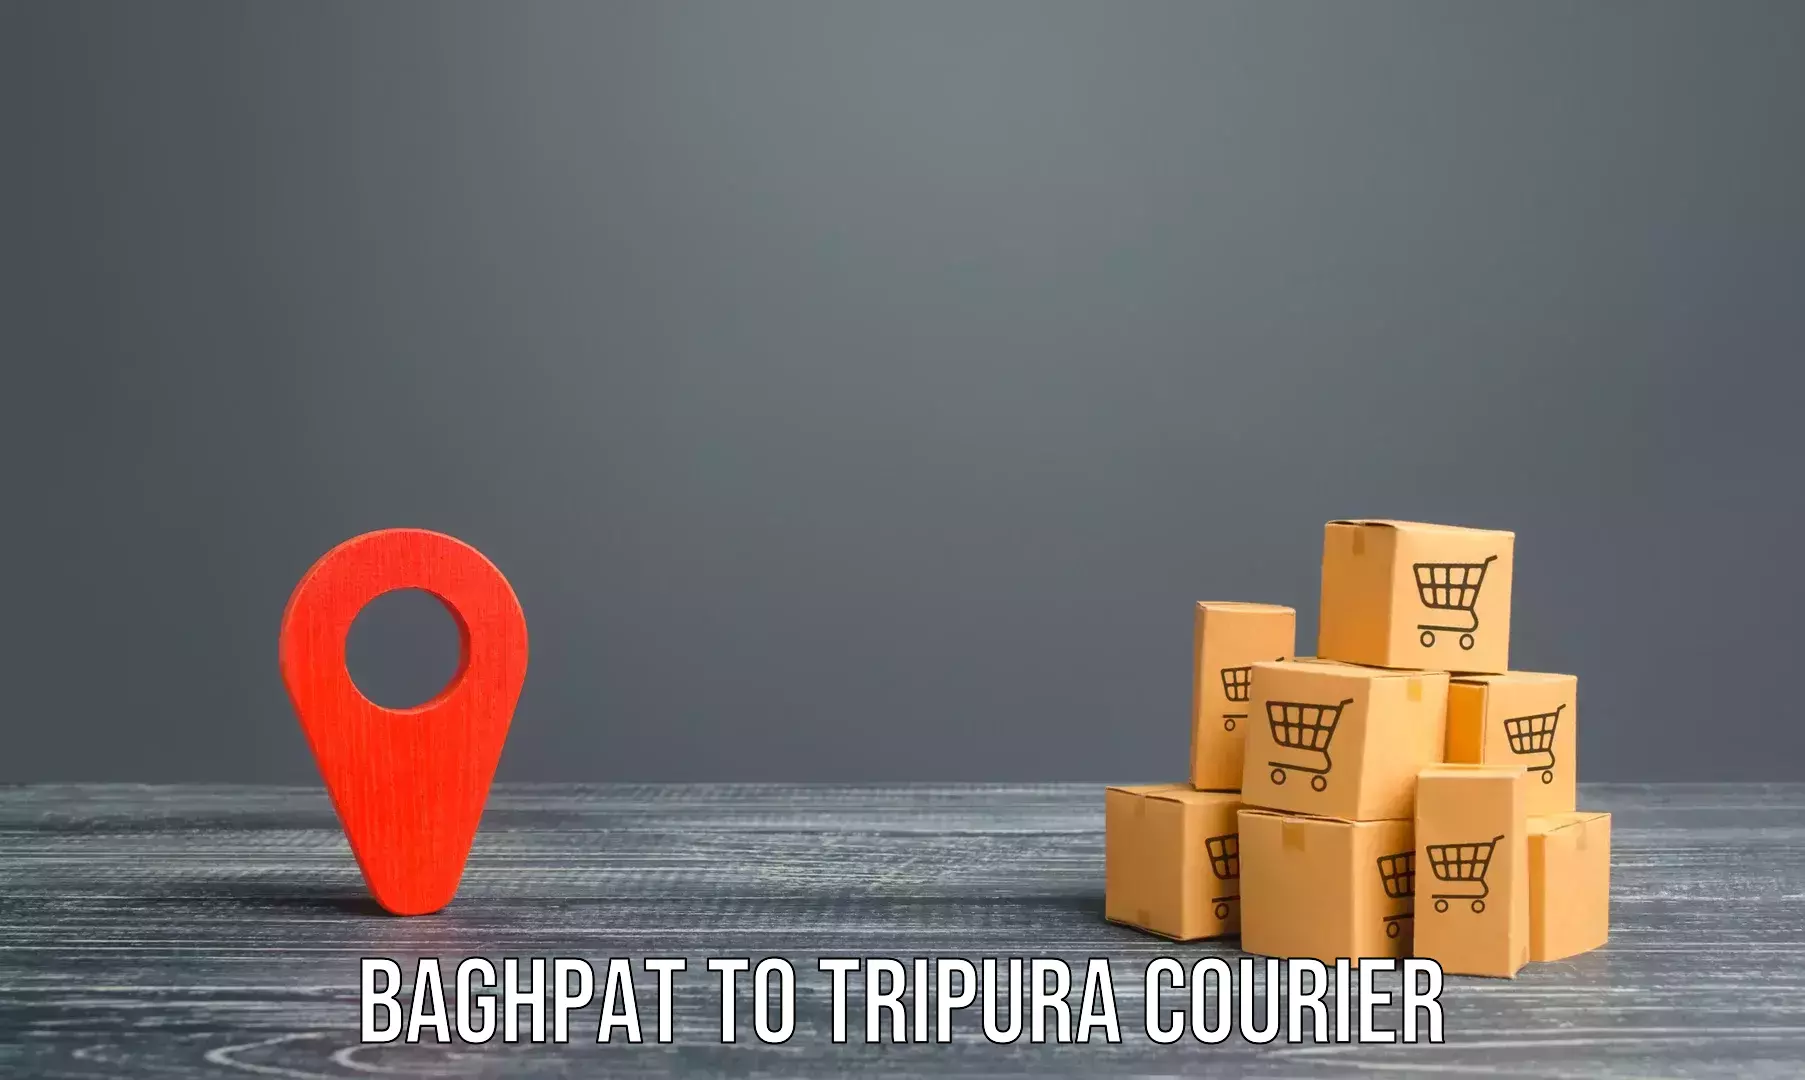 Furniture transport specialists Baghpat to Tripura